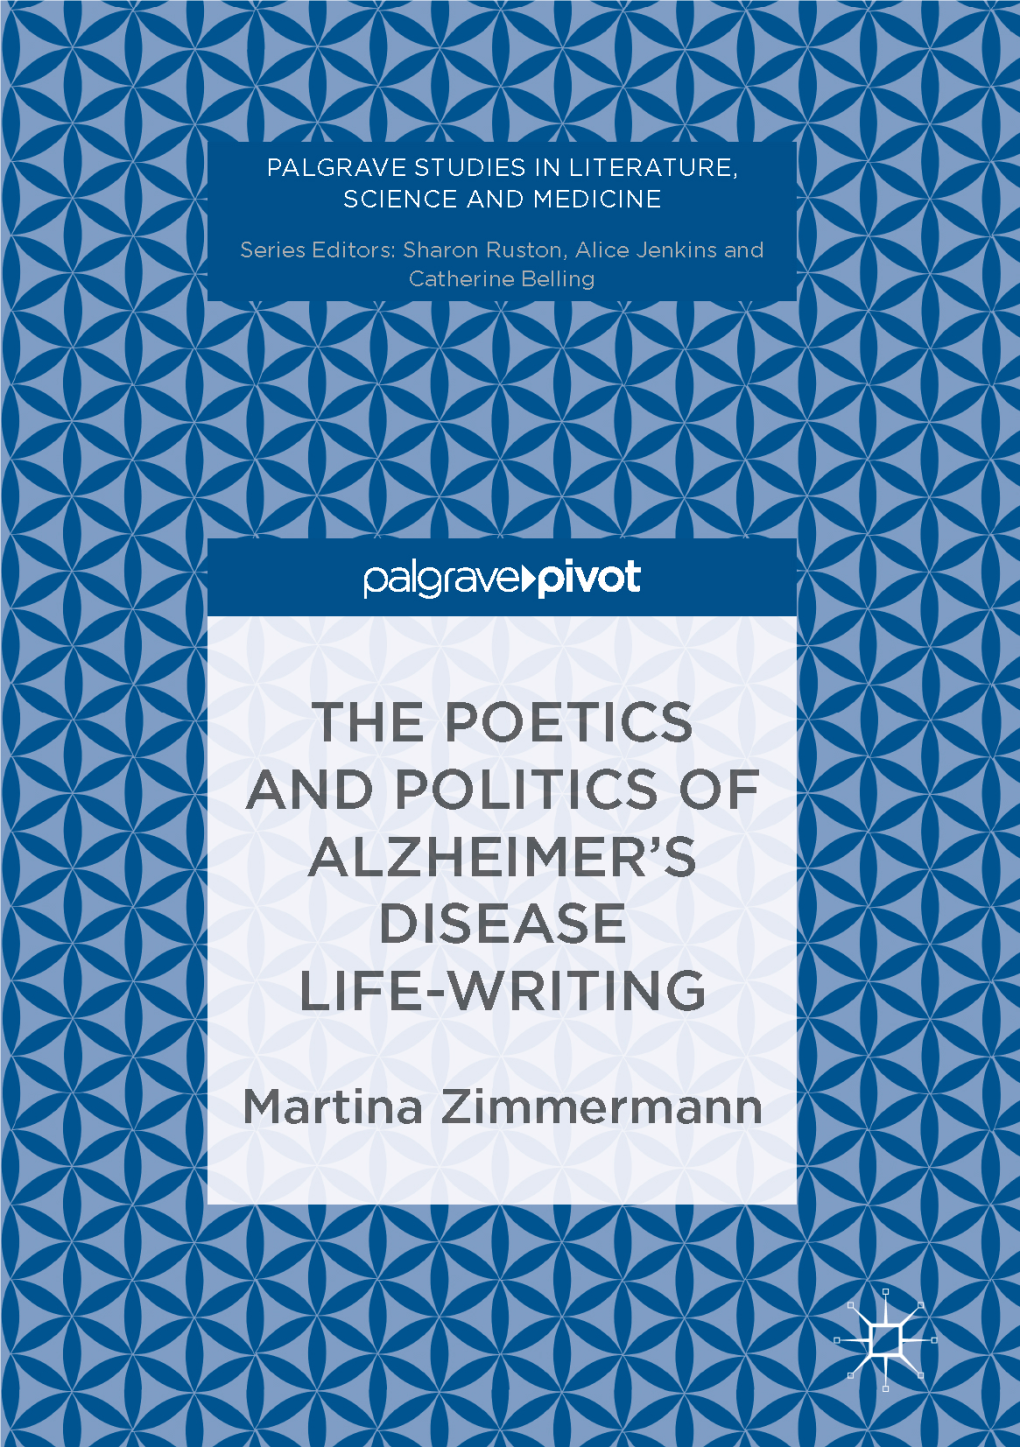 The Poetics and Politics of Alzheimer's Disease Life-Writing